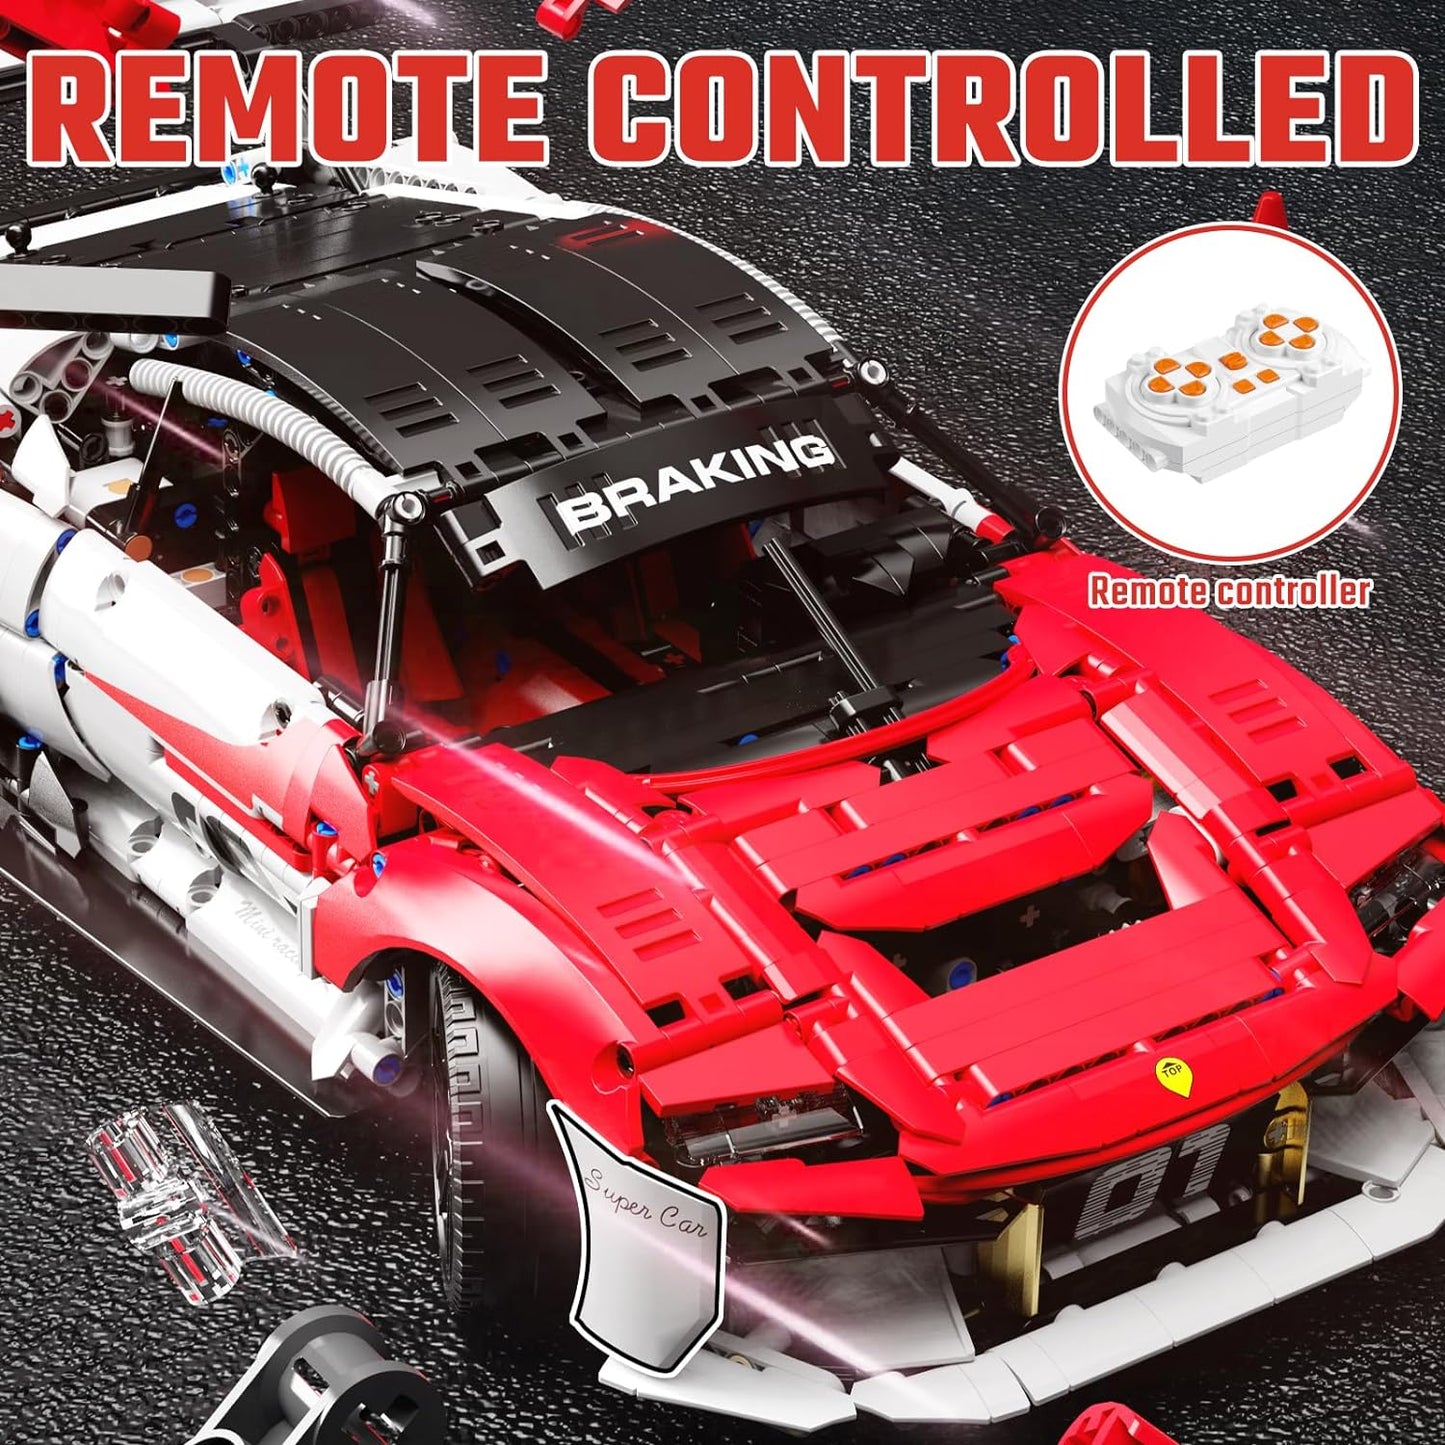 Technic Supen Car Moc Building Blocks Toy Sets - Collectible Play Model Building Kit - Stem Toys for 8+ Years Old - 1:5 Supercar Building Bricks for Kids and Adults（2459+pcs）